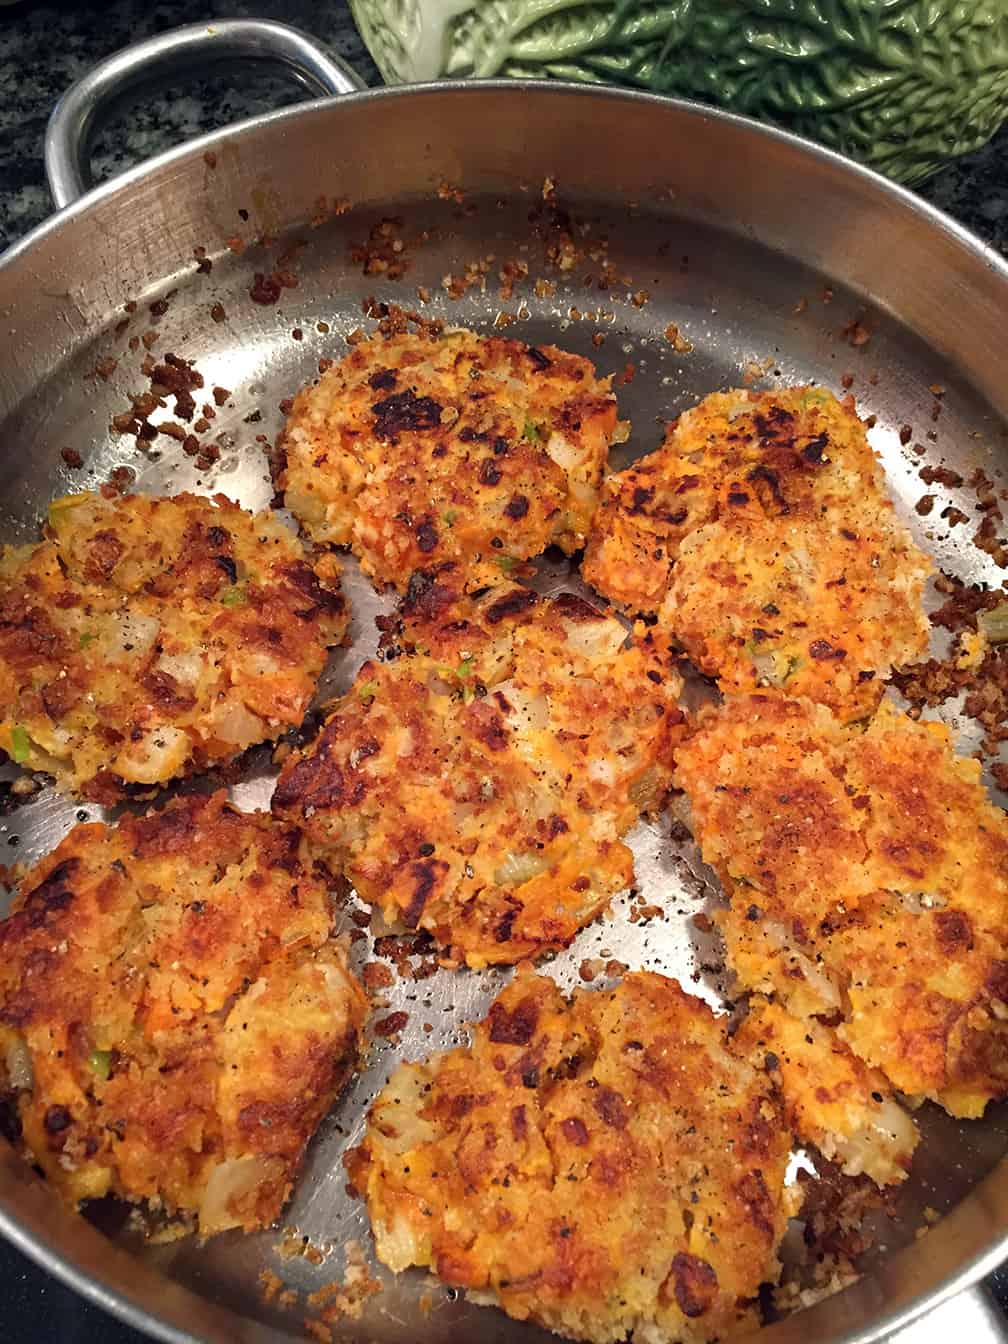 Yummy and crunchy - sweet potato cakes ready to serve.